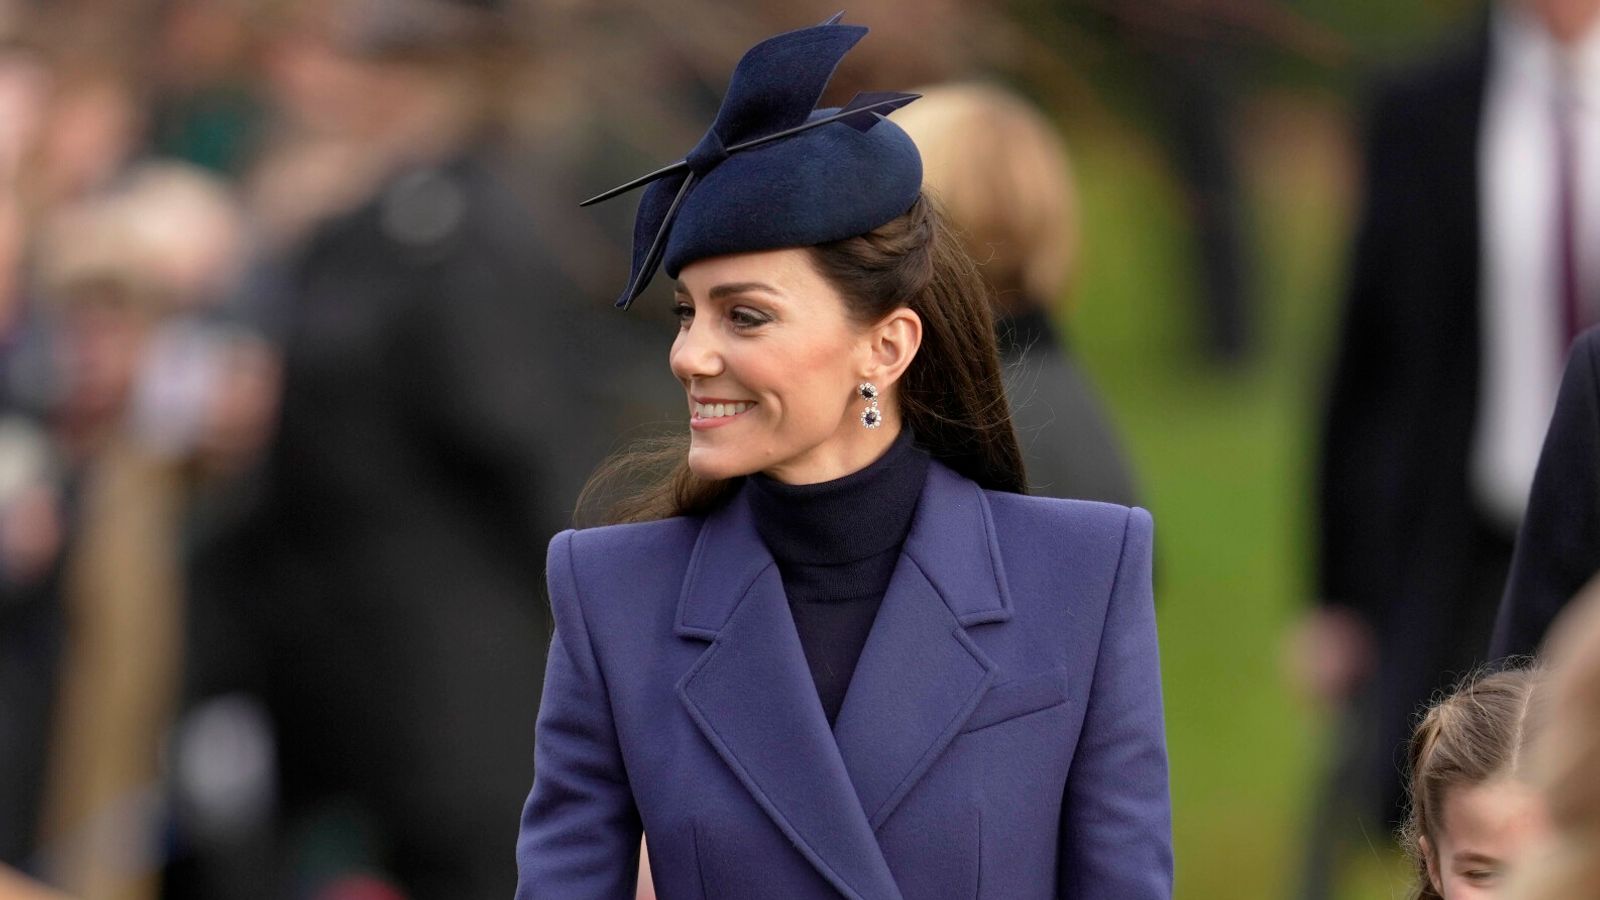 Kate photographed for first time since abdominal surgery